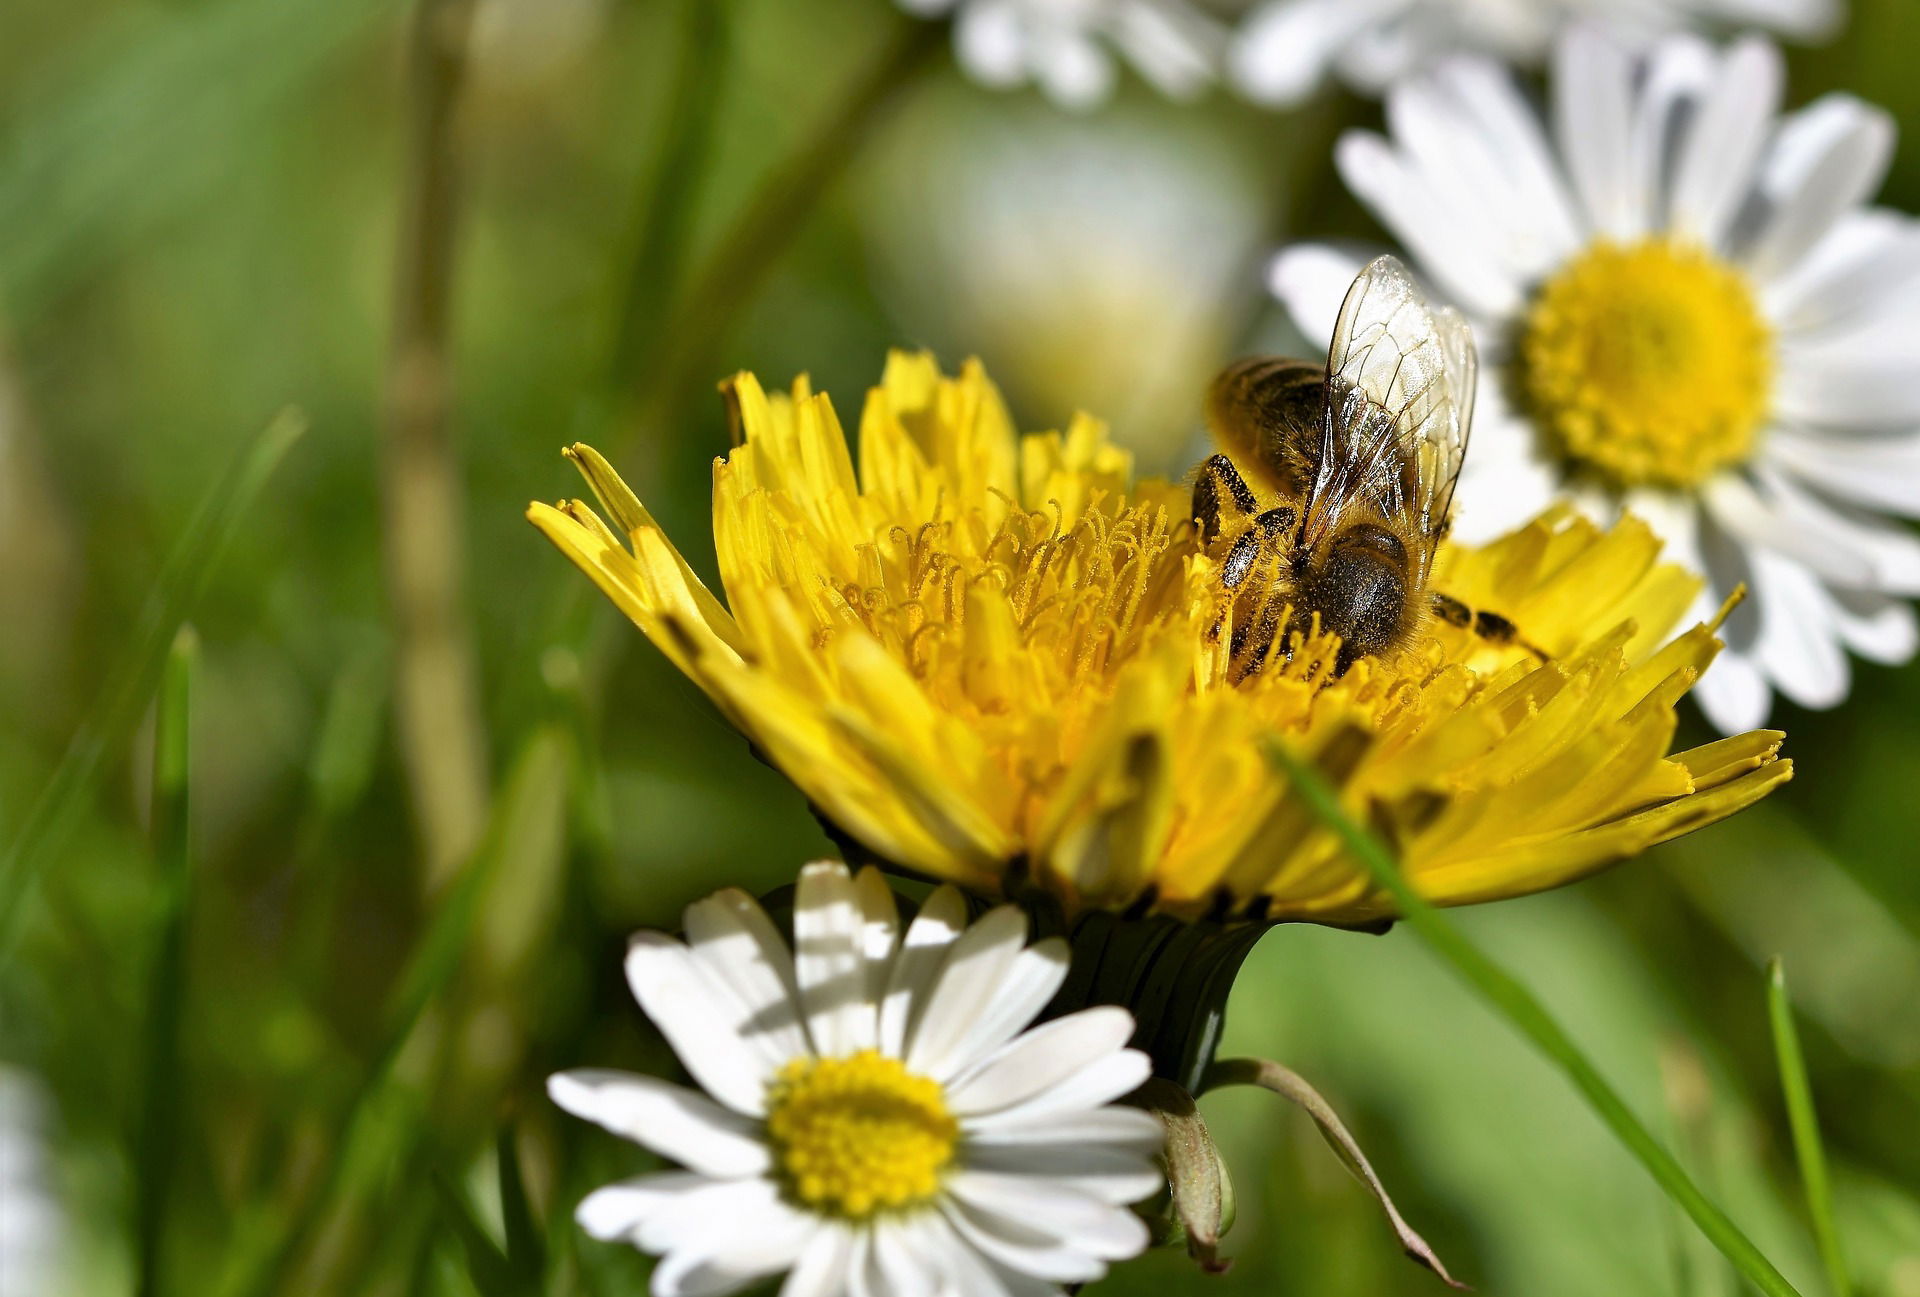 Environment: "Good Agricultural Practices & Pollinators protection"